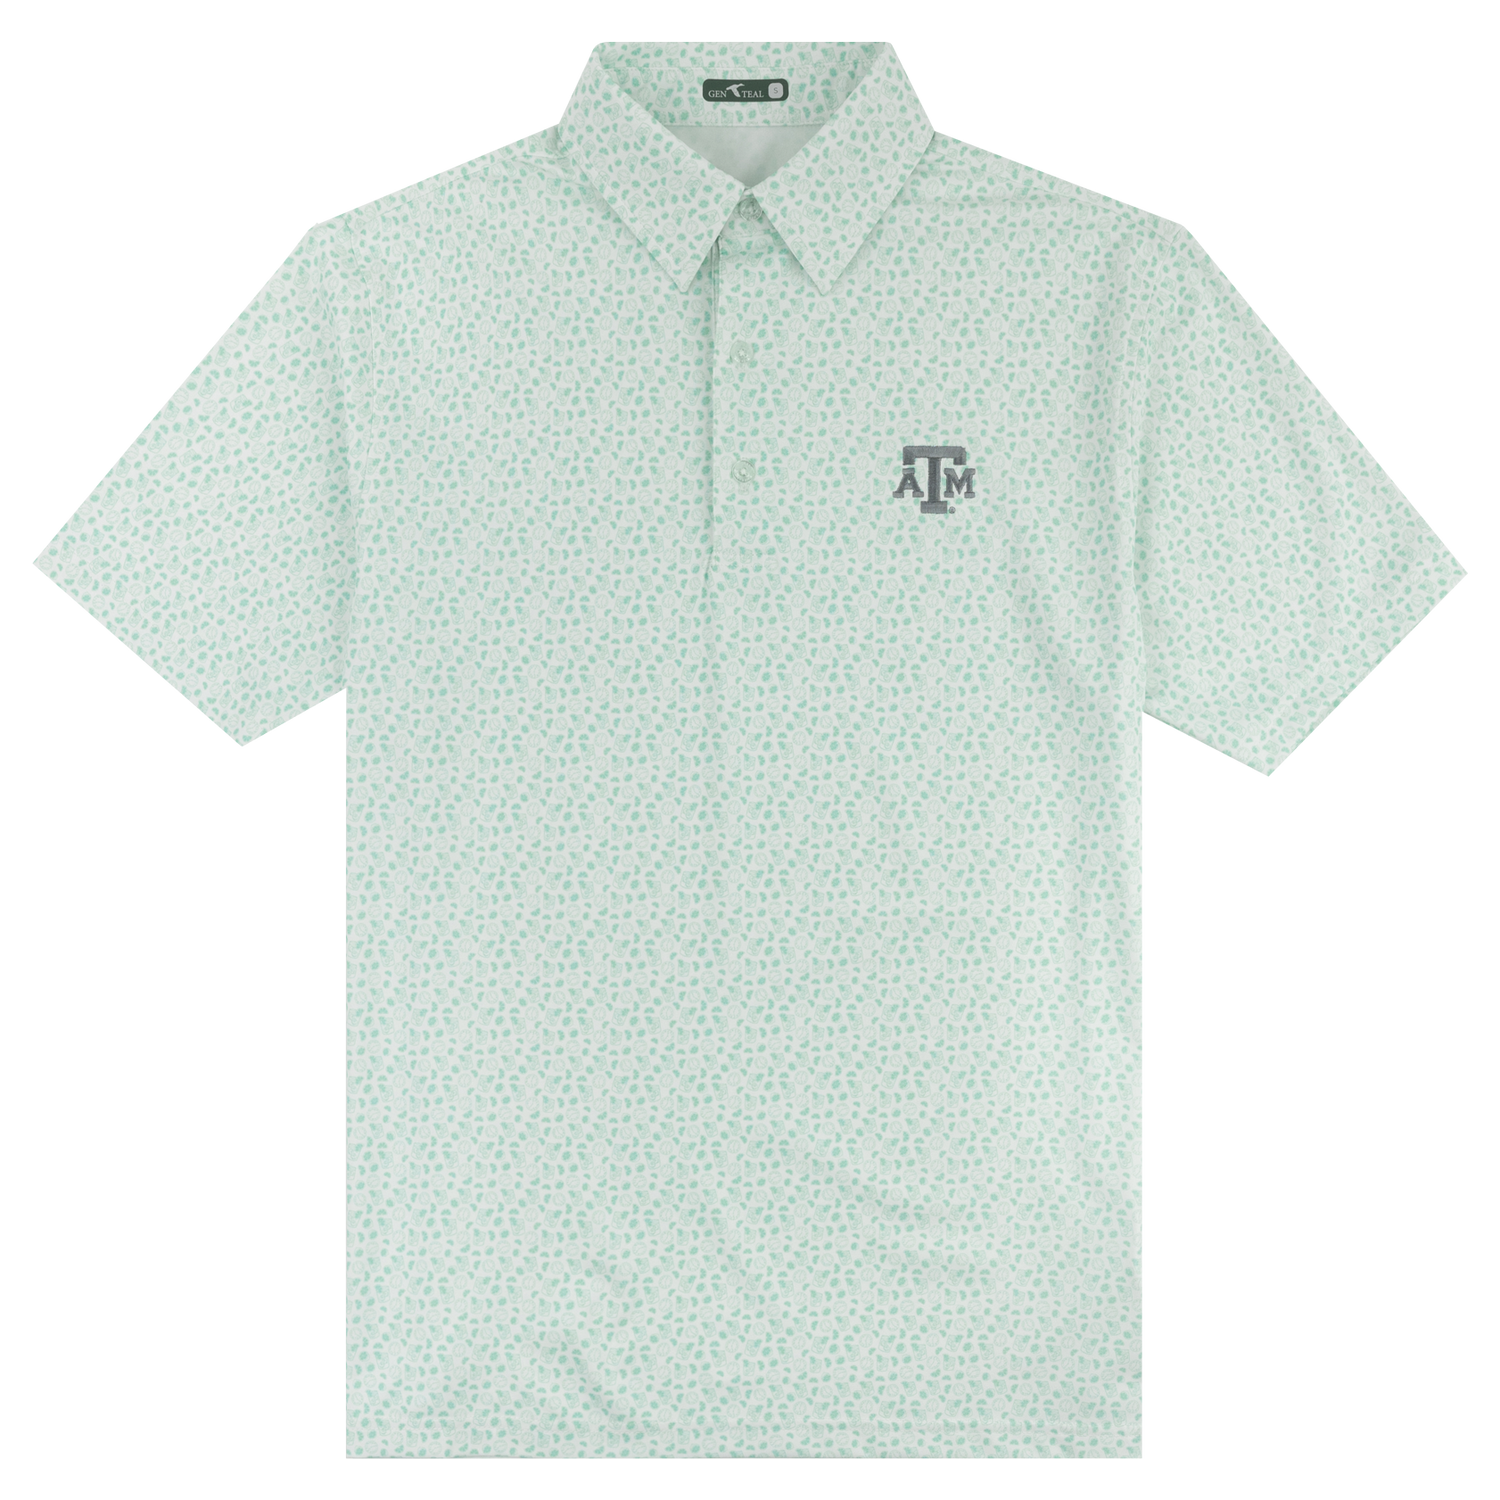 Texas A&M Gen Teal Happy Hour Performance Polo